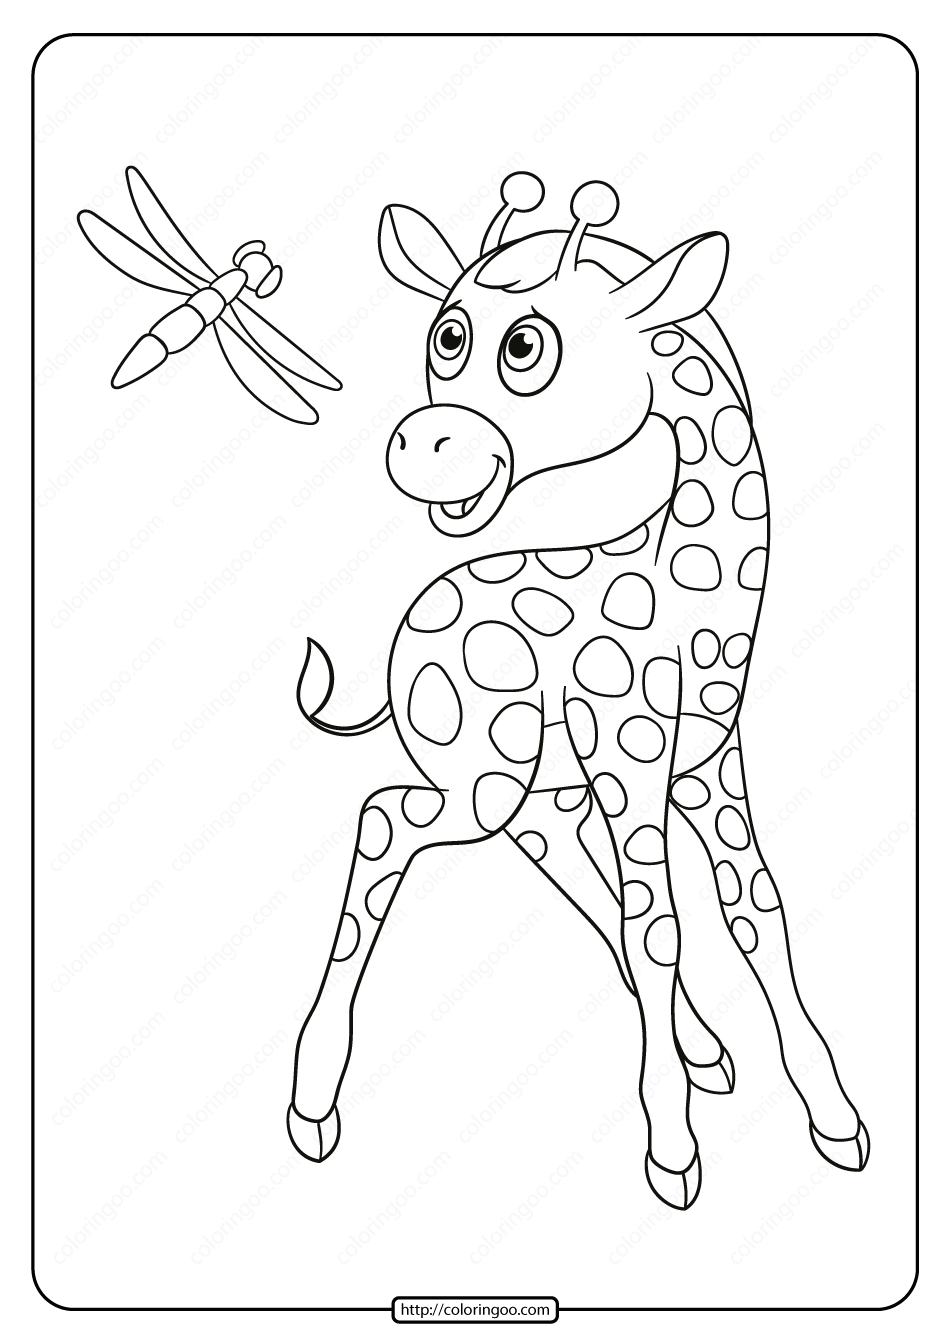 printable giraffe and dragonfly pdf coloring page